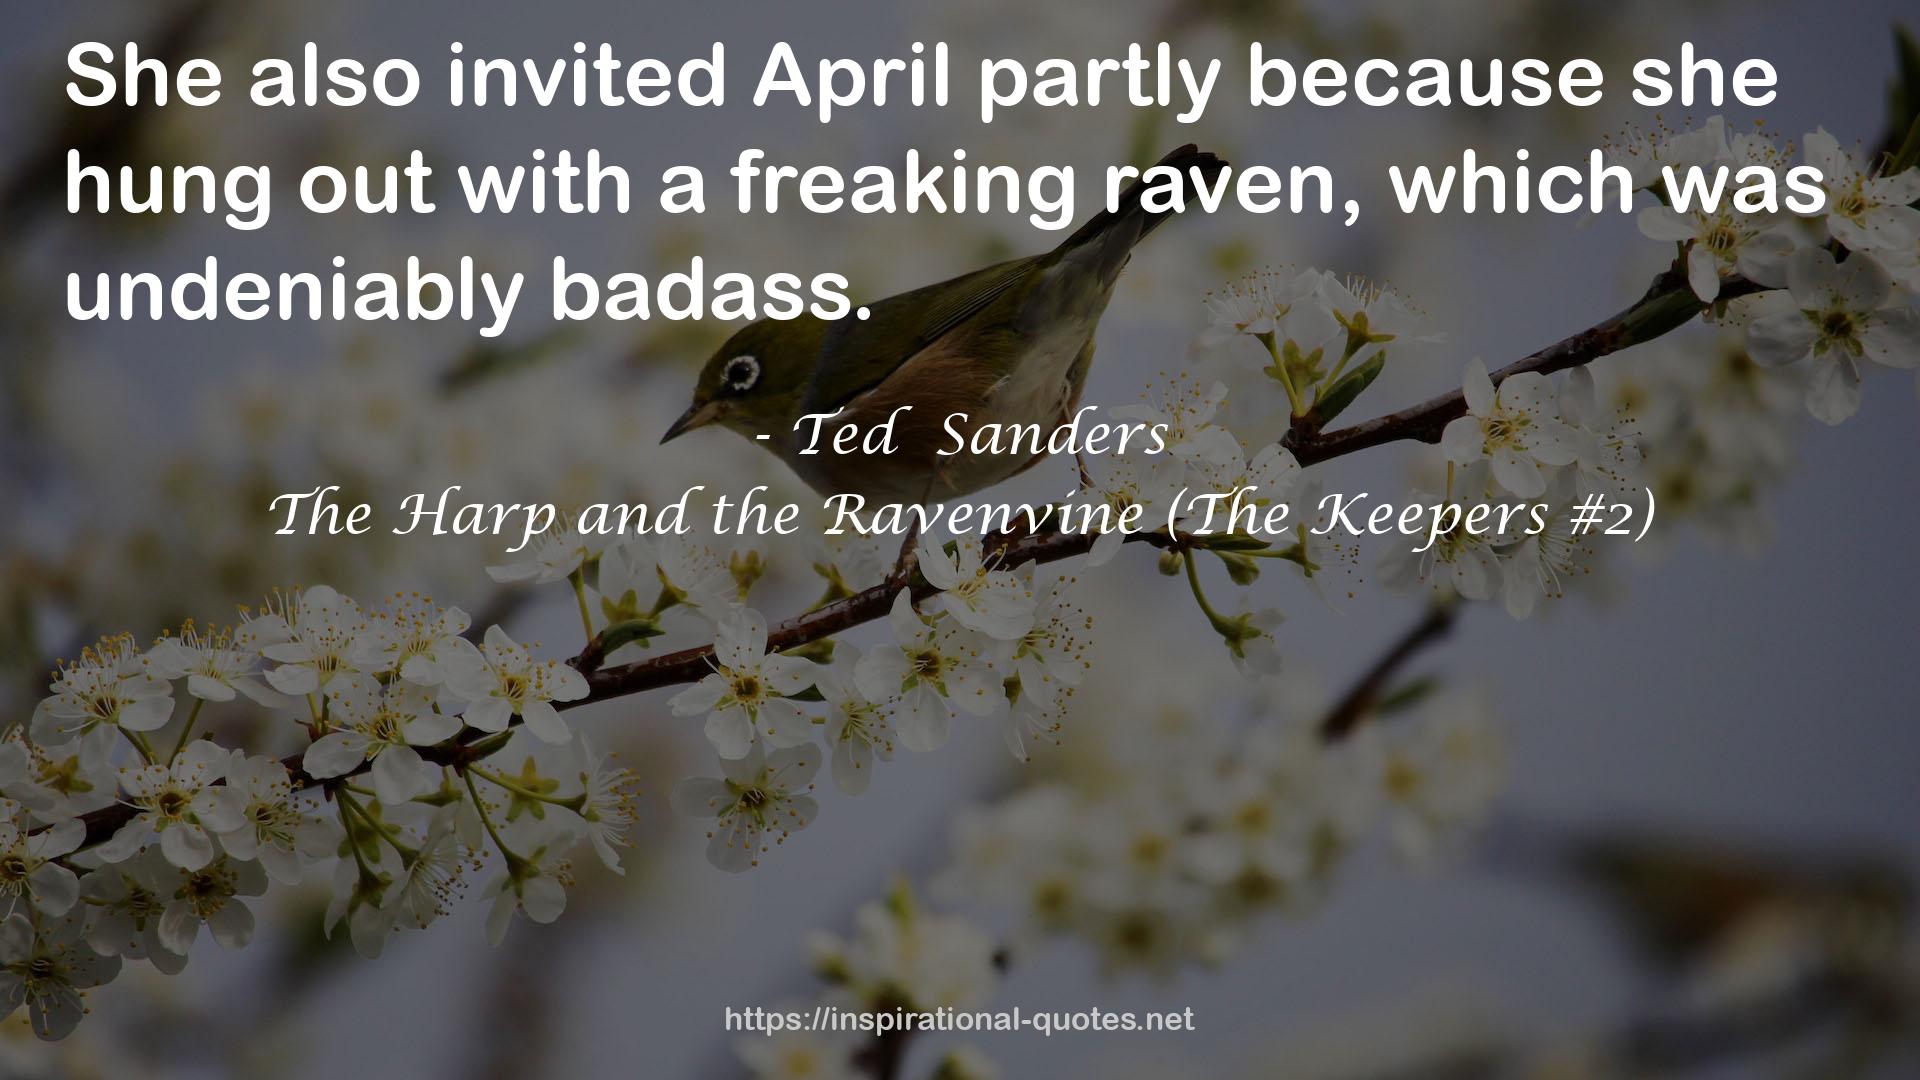 The Harp and the Ravenvine (The Keepers #2) QUOTES